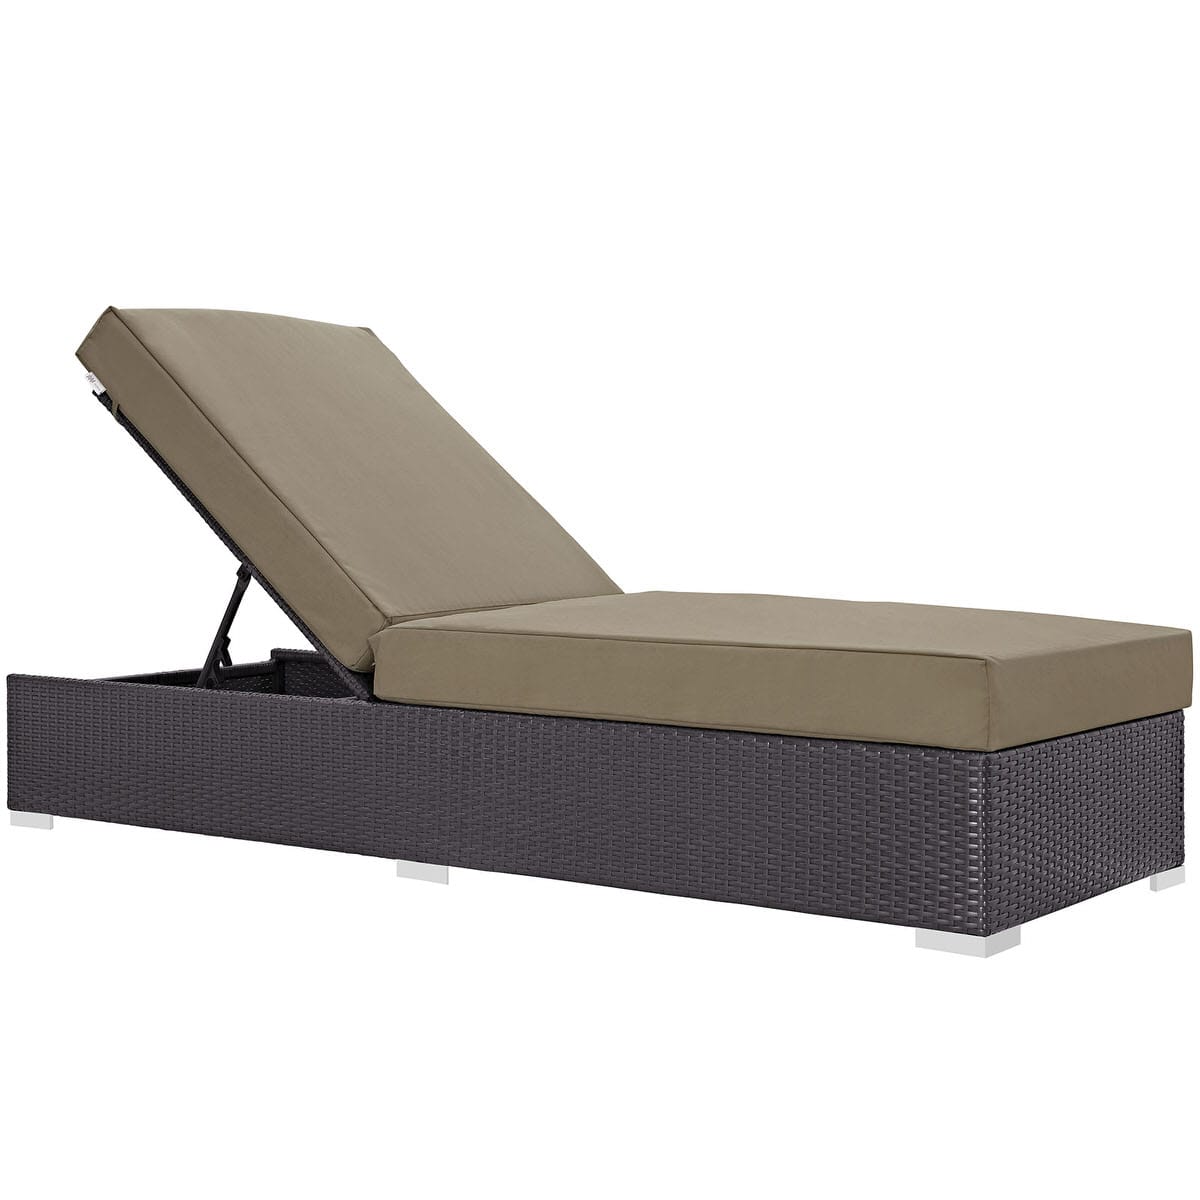 Featured image of post Modern Living Chaise Longue Patio : These chaise lounge chairs are sure to impress at your next gathering.